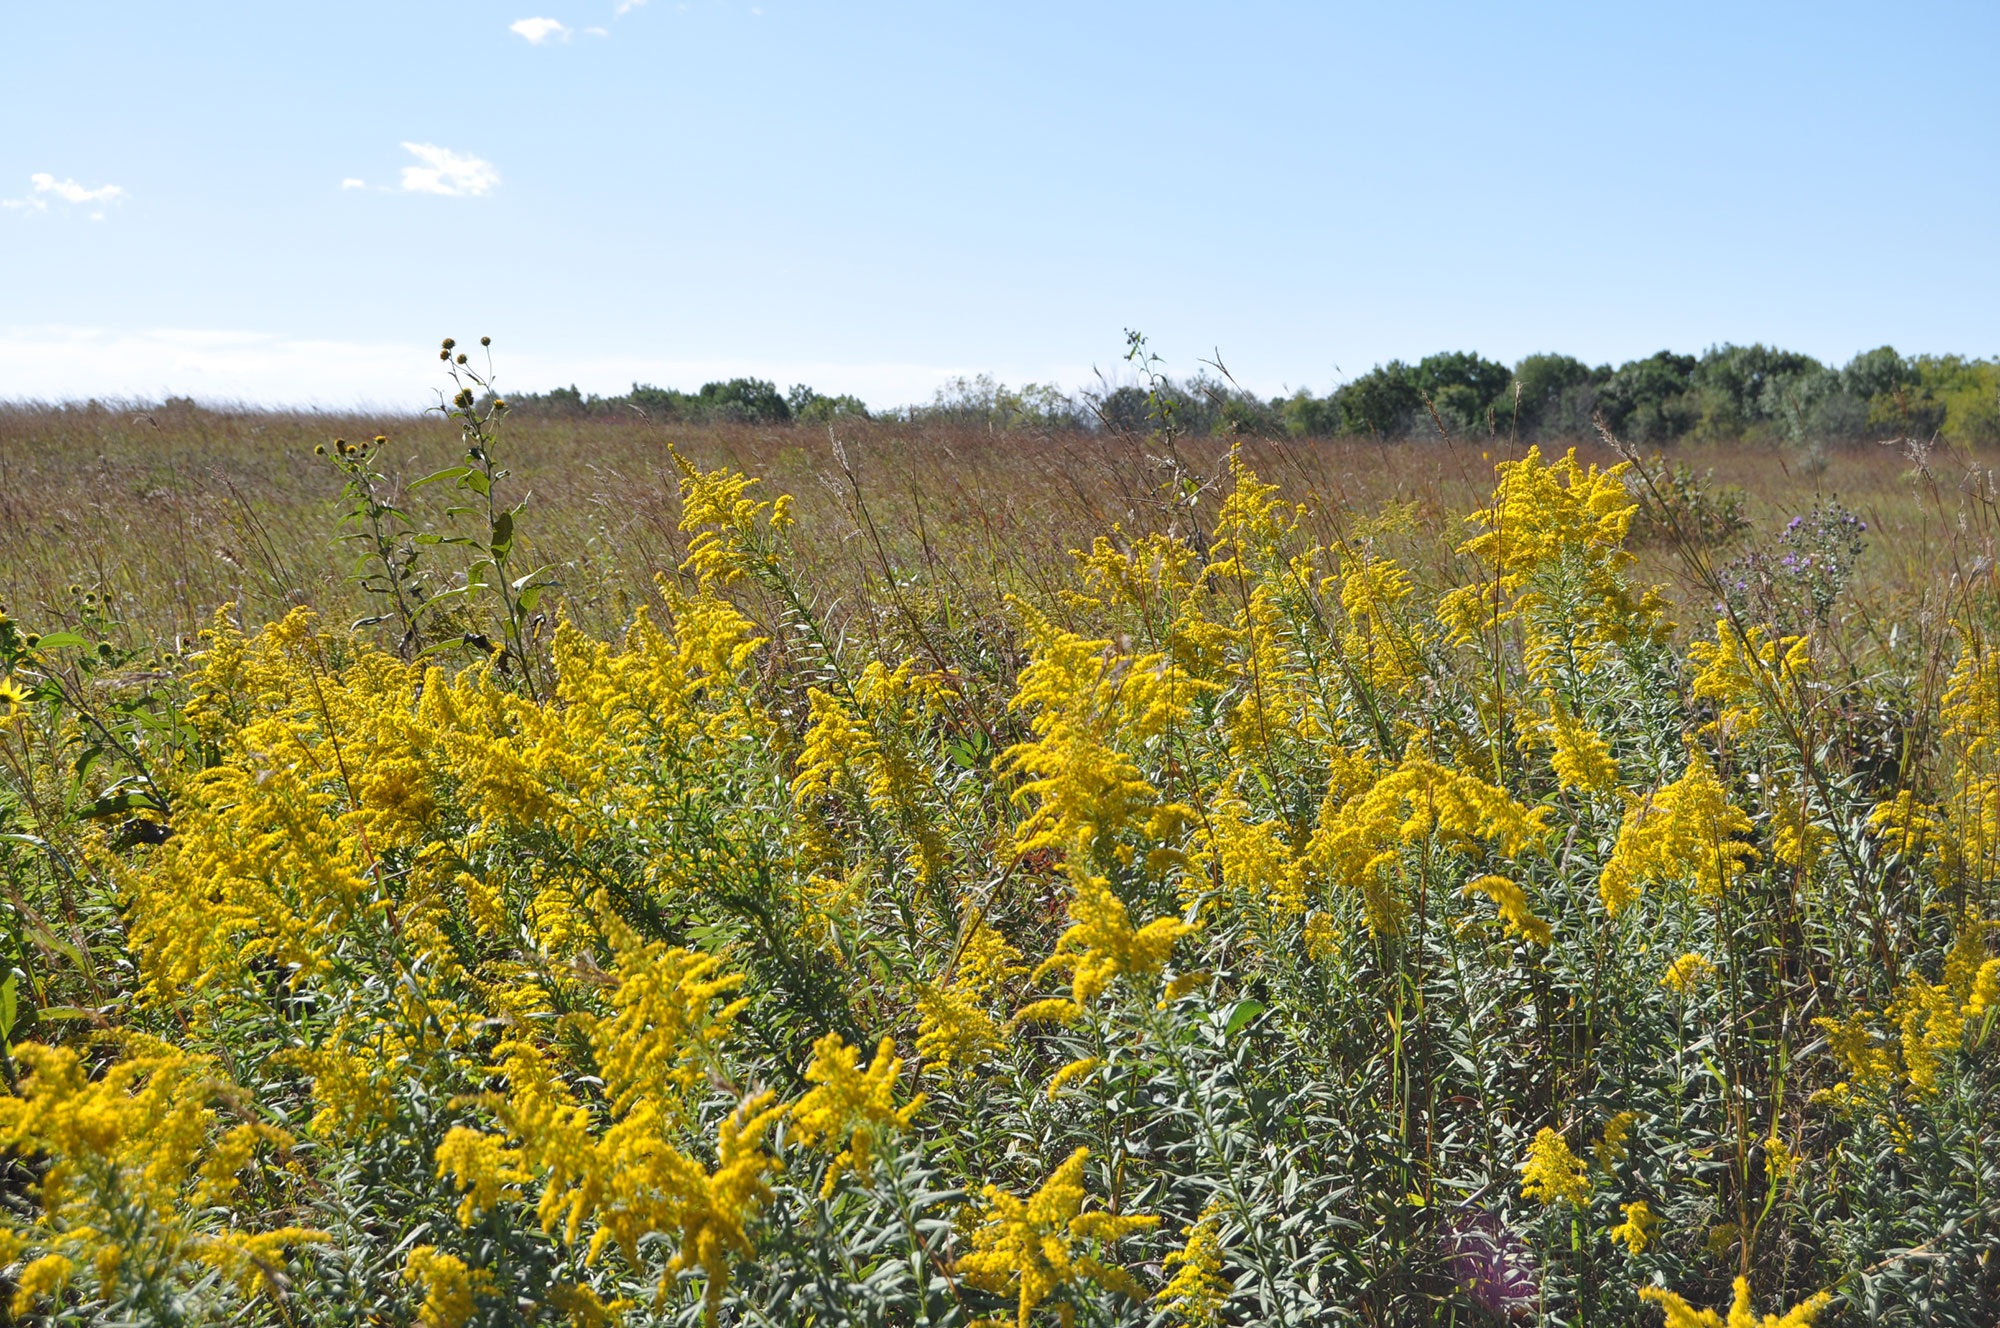 A field of goldenrod.